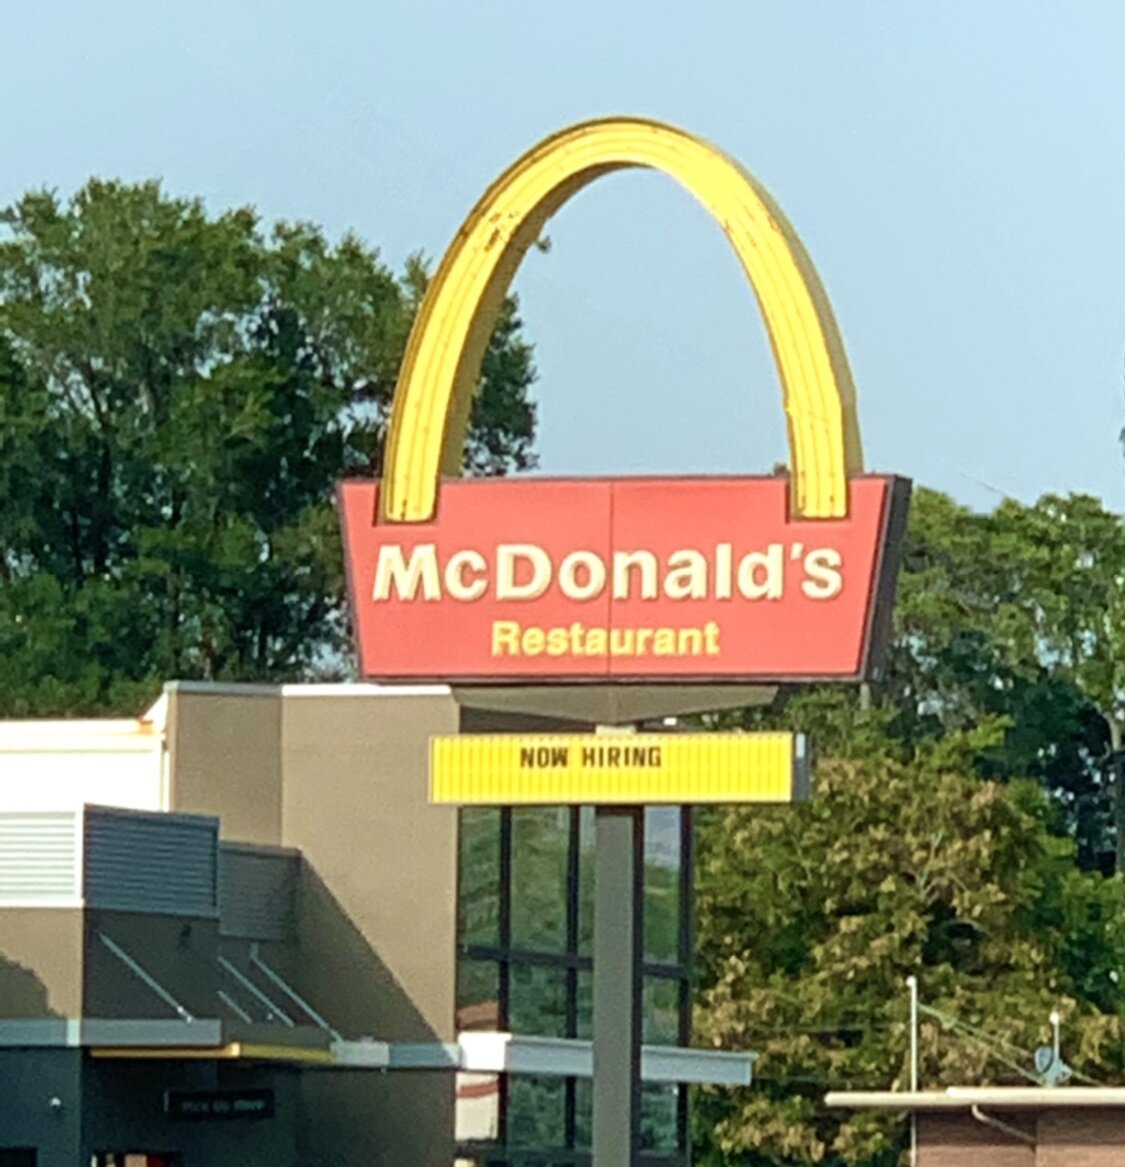  The final wonder of our Colorado excursion was this  one-arched McDonalds  sign in Montrose. McDonald’s opened its first restaurant in San Bernardino, California in 1940, and quickly became a fast-food chain that has expanded into 119 countries and 